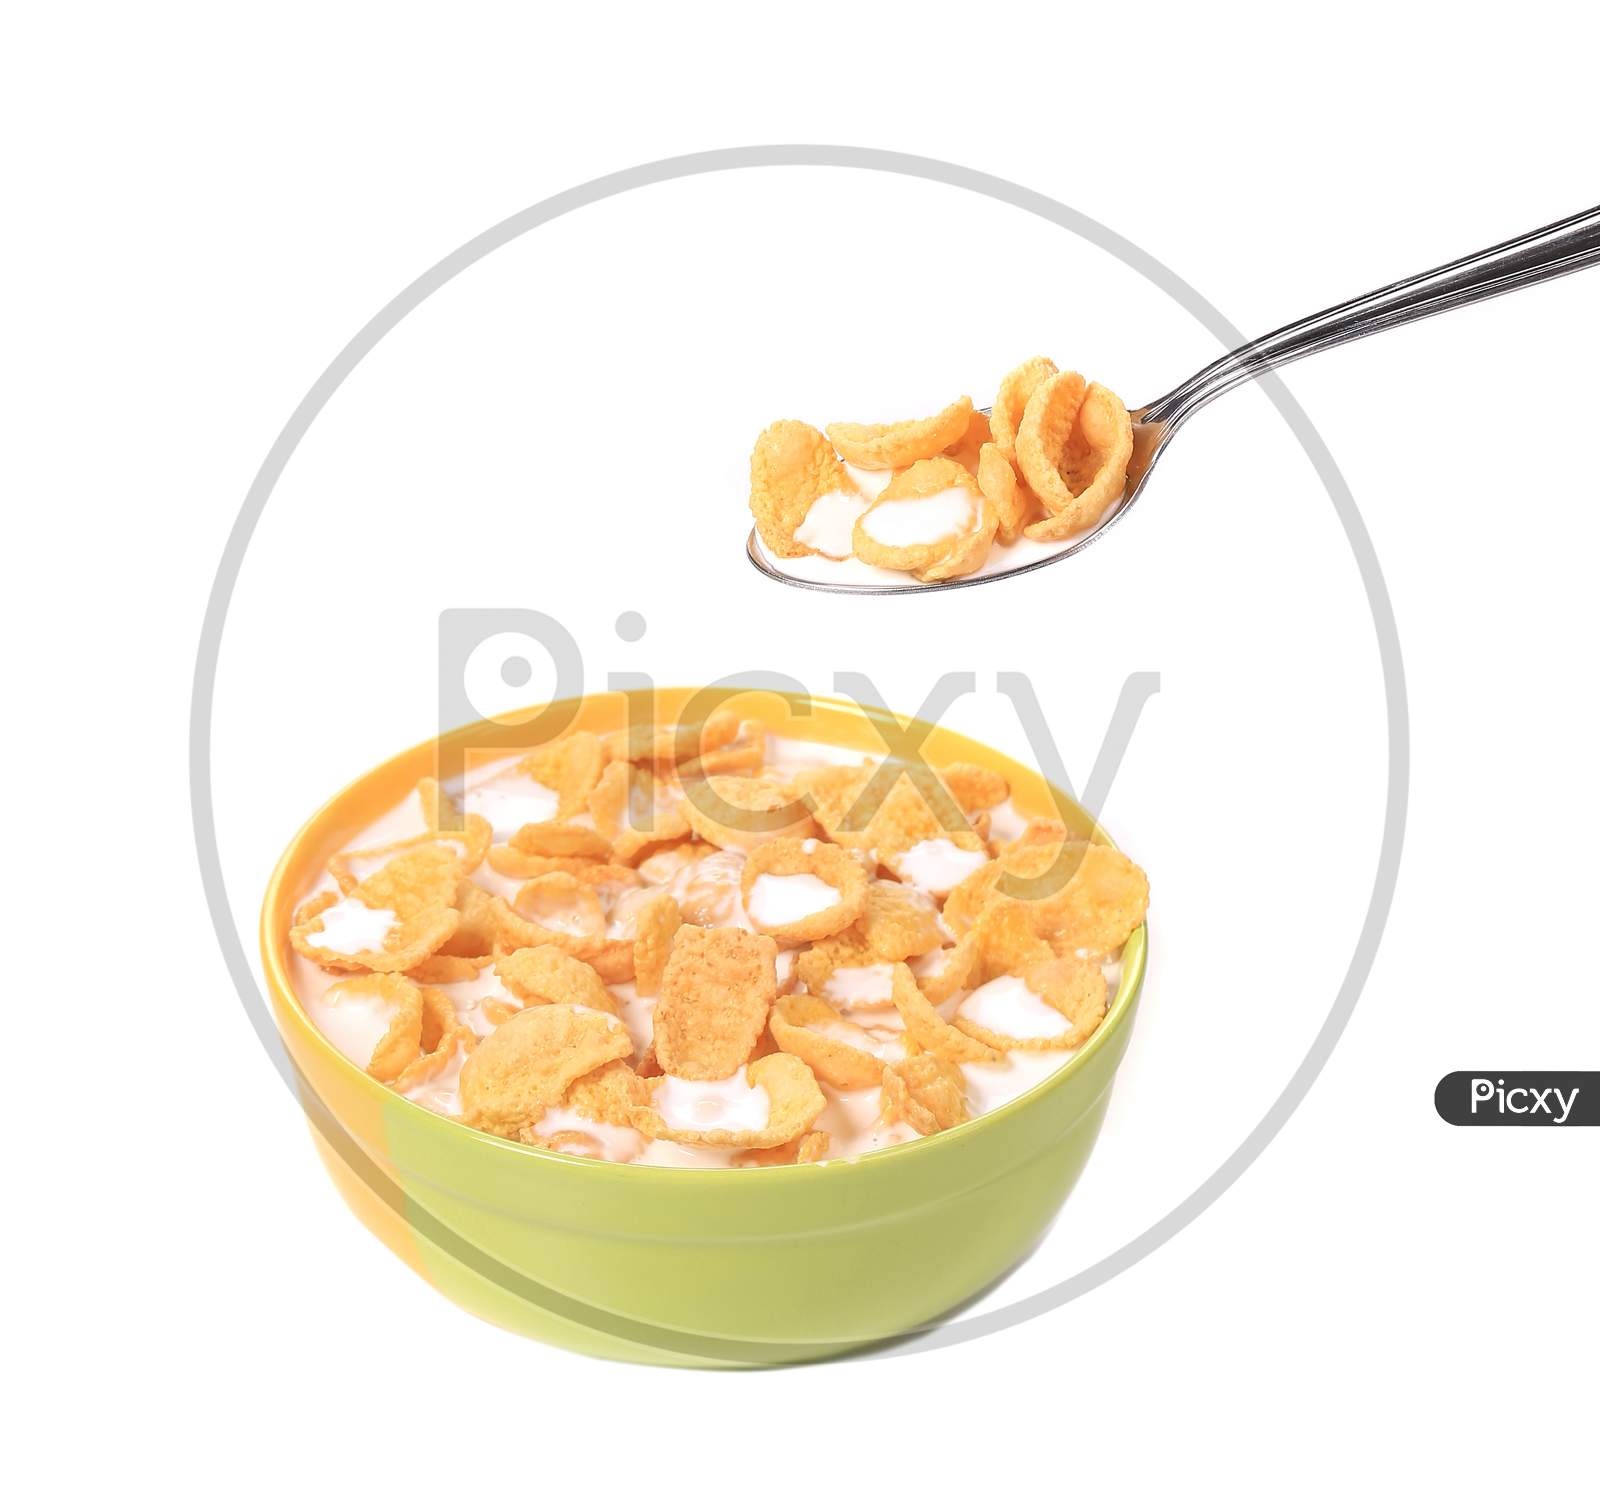 Bowl Of Sugar-Coated Corn Flakes With Milk And Spoon.